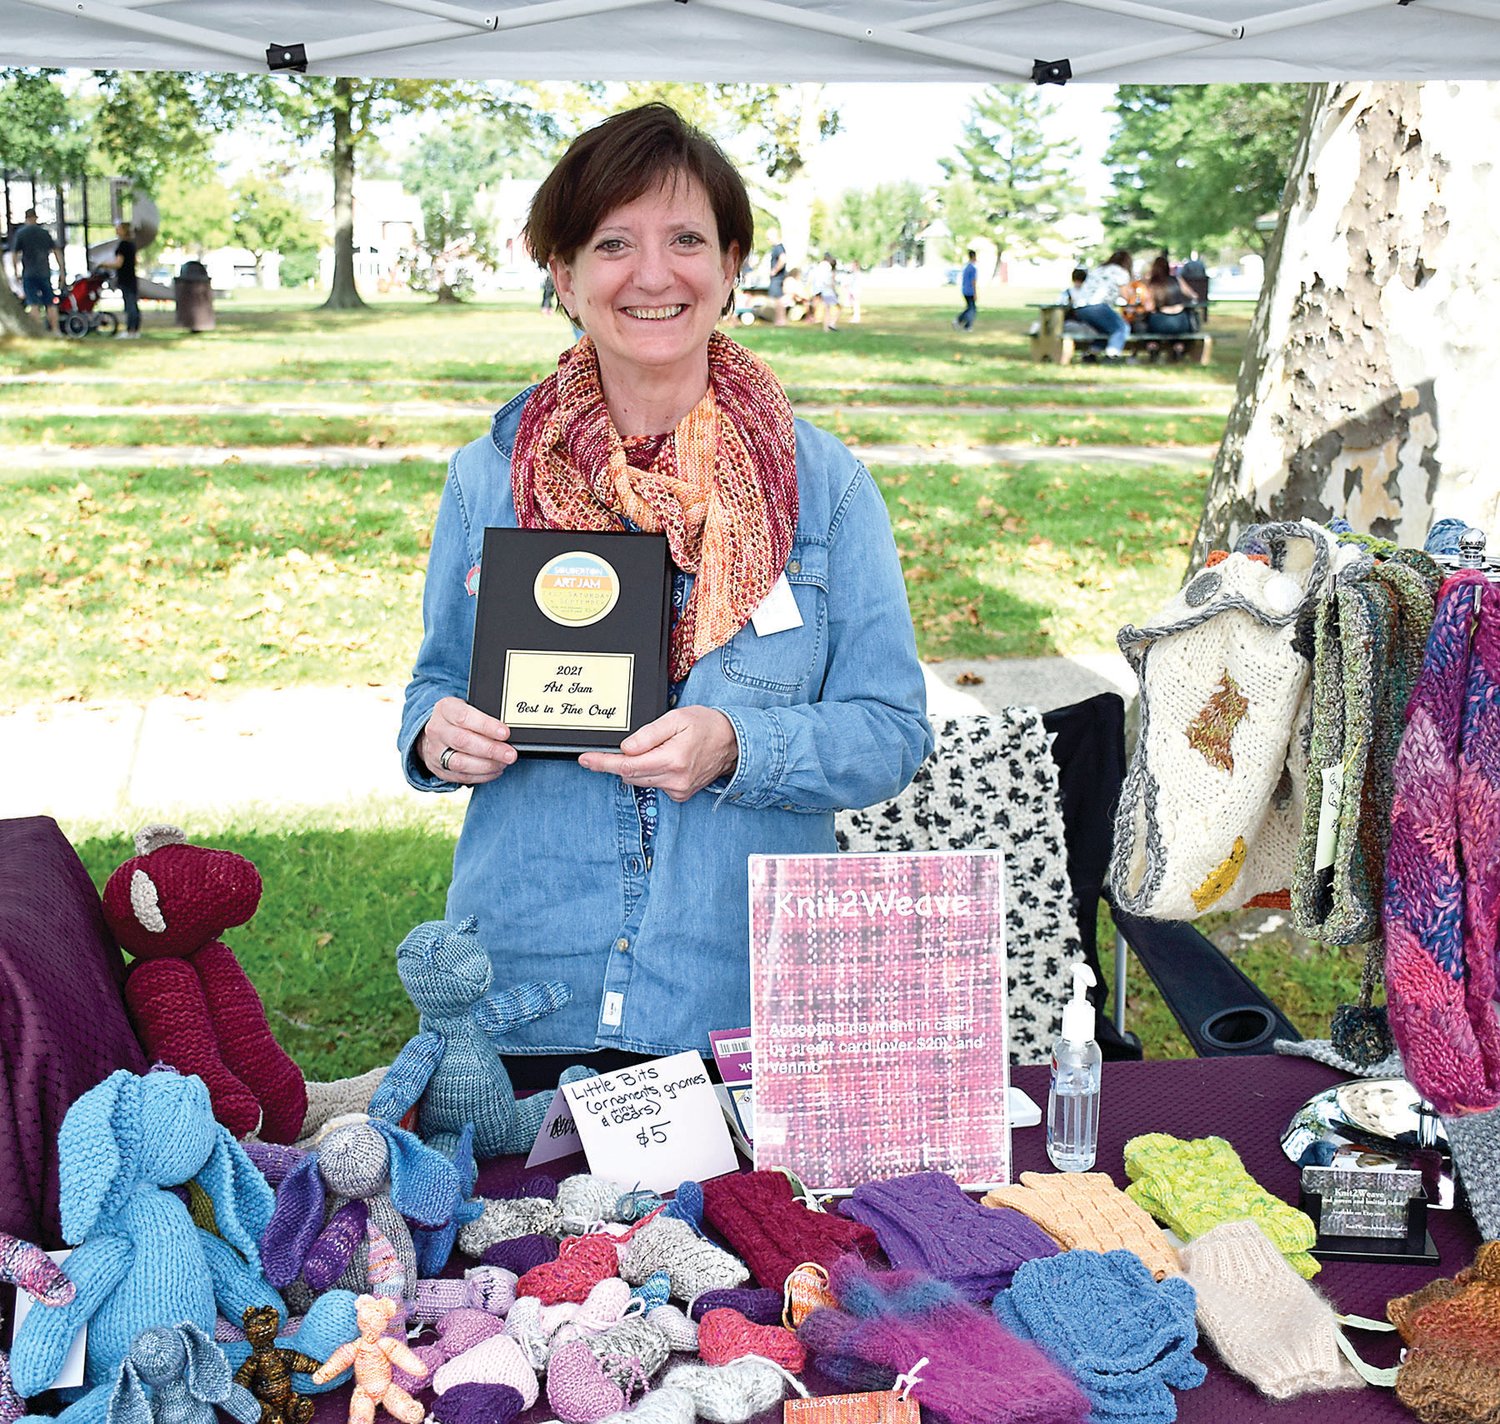 Cathy Decherney of Knit2Weave received the Best in Craft award.